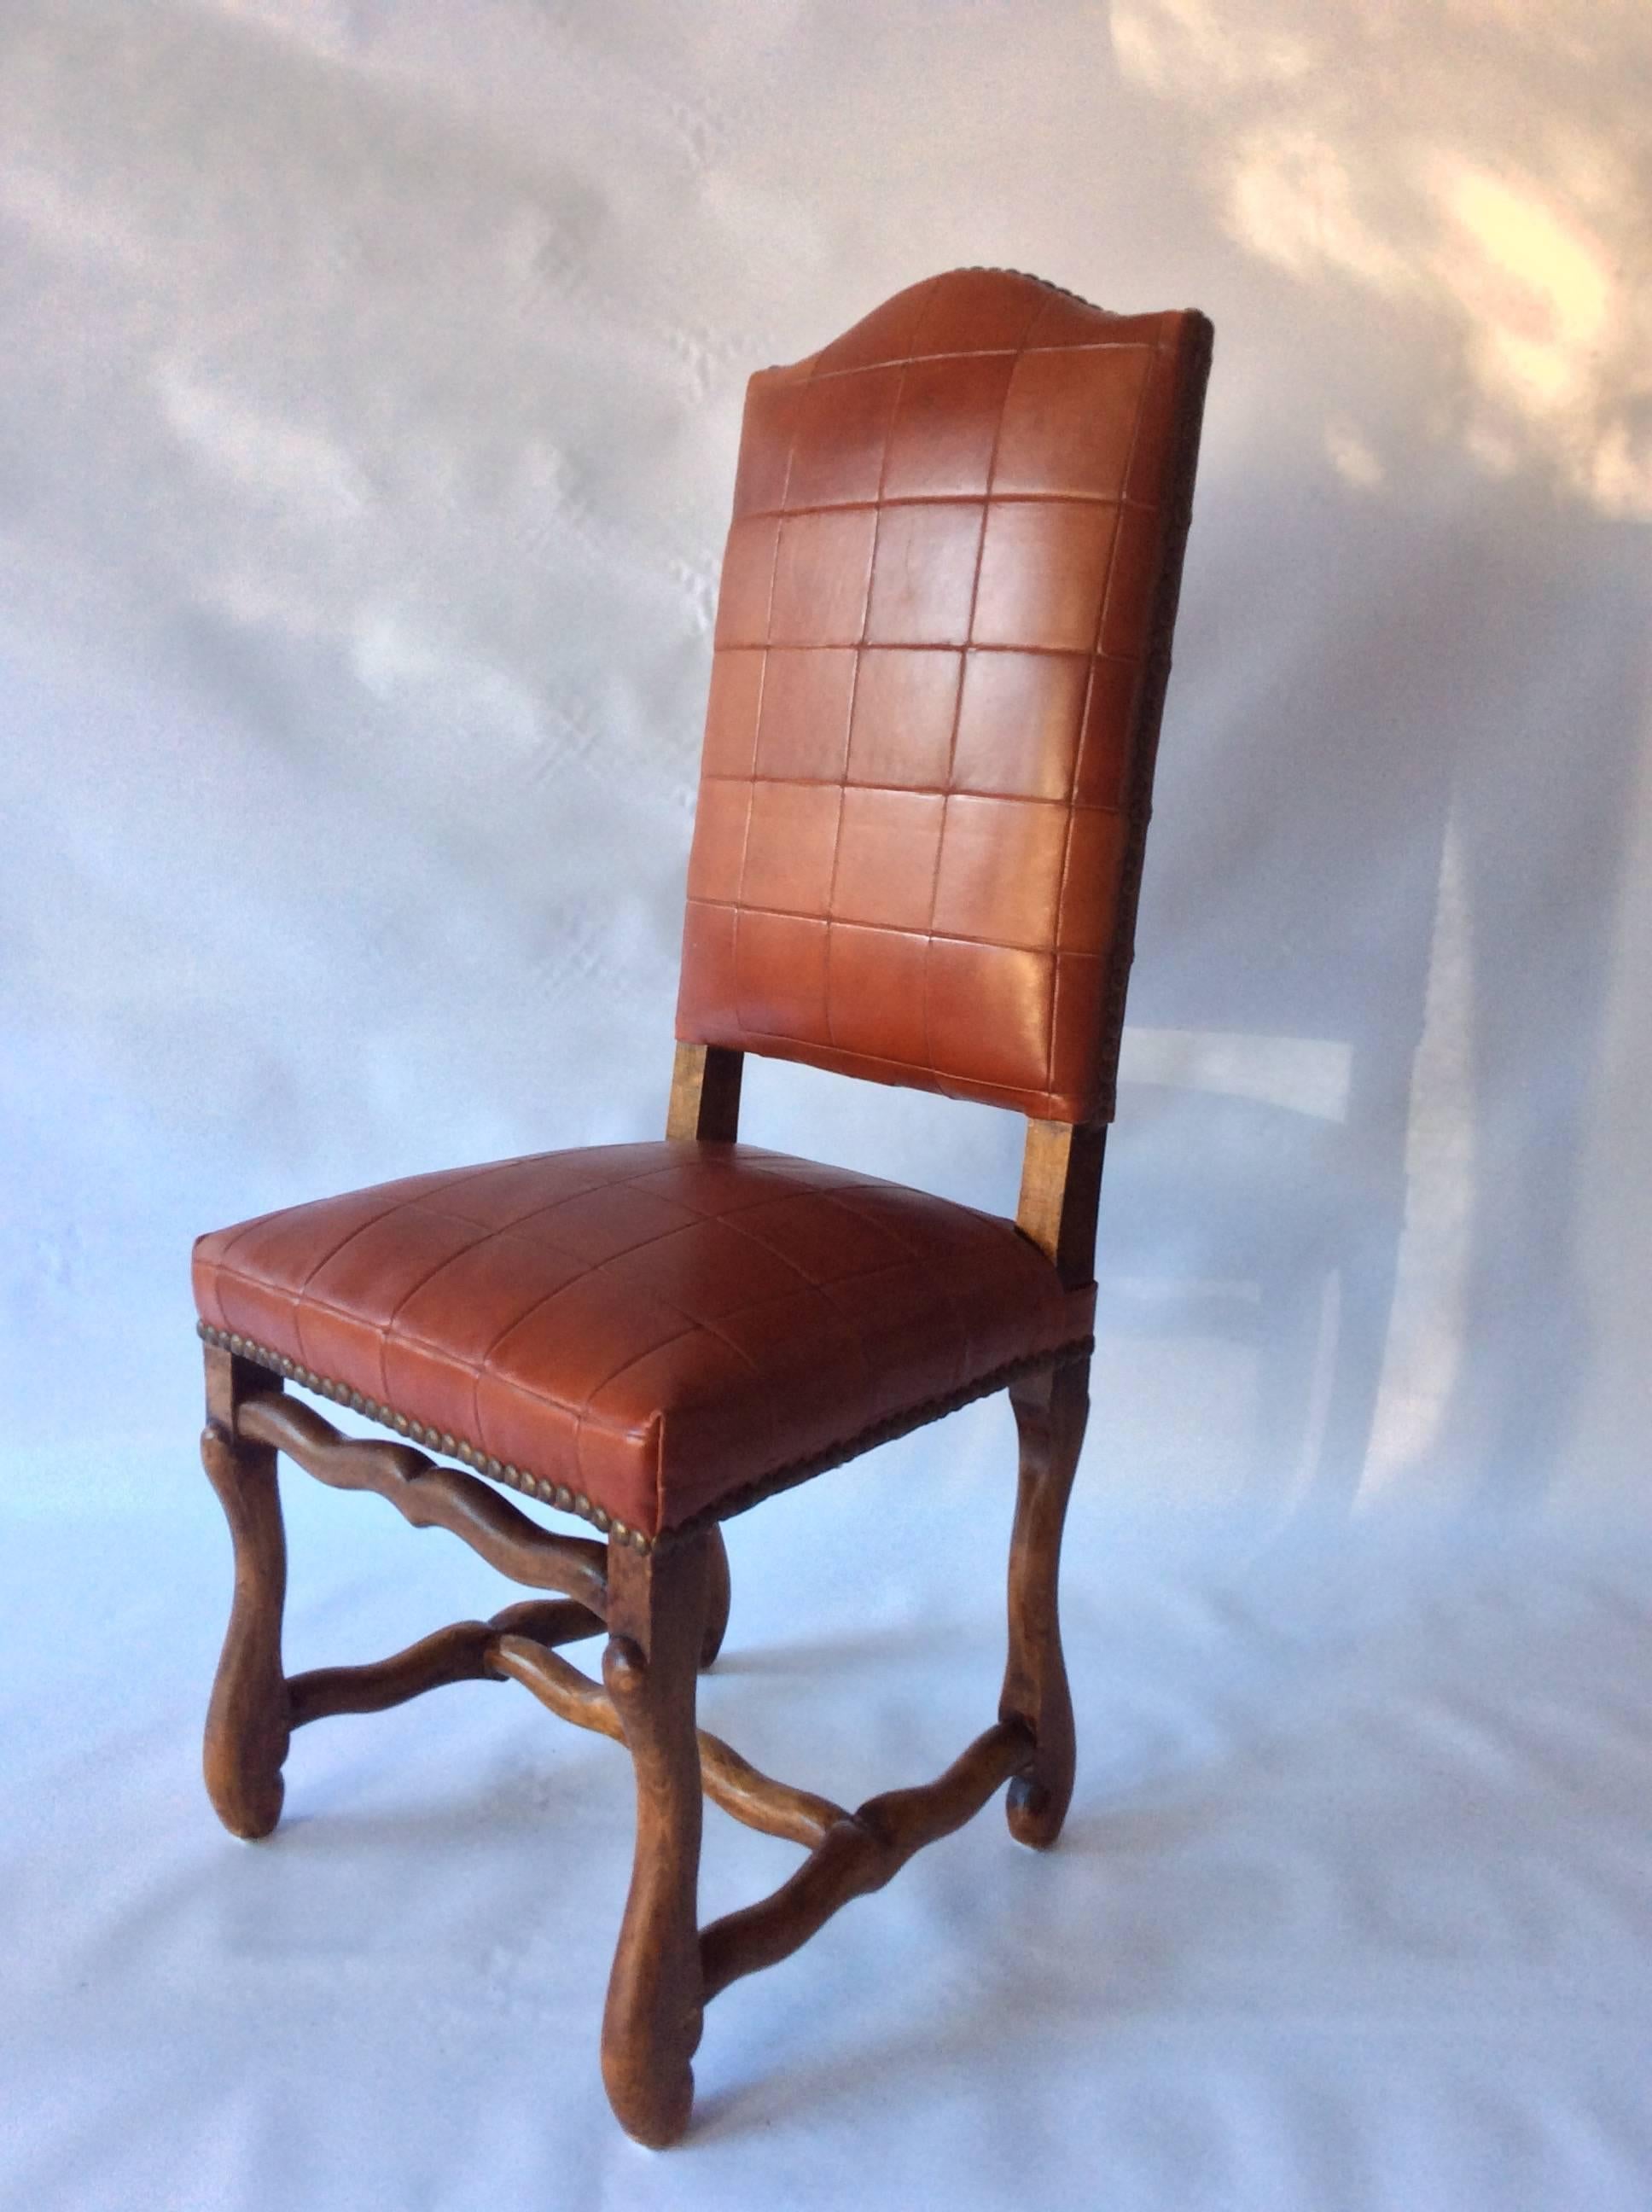 A custom upholstered, set of six, 19th century continental dining chairs with Os de Mouton peg joined bases, updated in fabulous stitched oxblood patchwork leather by Todd Hase and aged brass nailhead trim. Excellent condition overall.